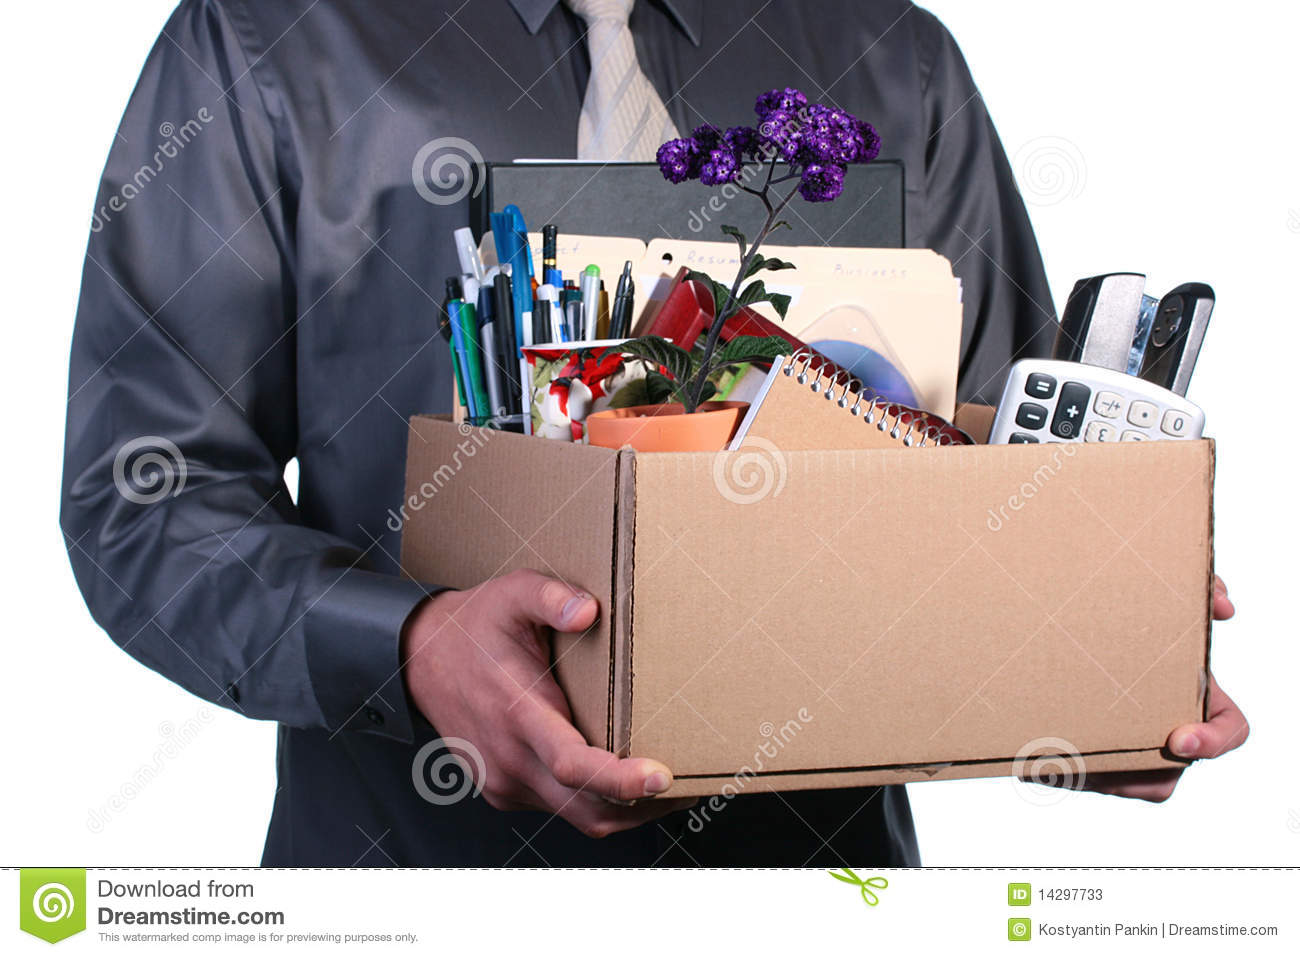 Dismissal The Man Has Control Over A Cardboard Box With Personal